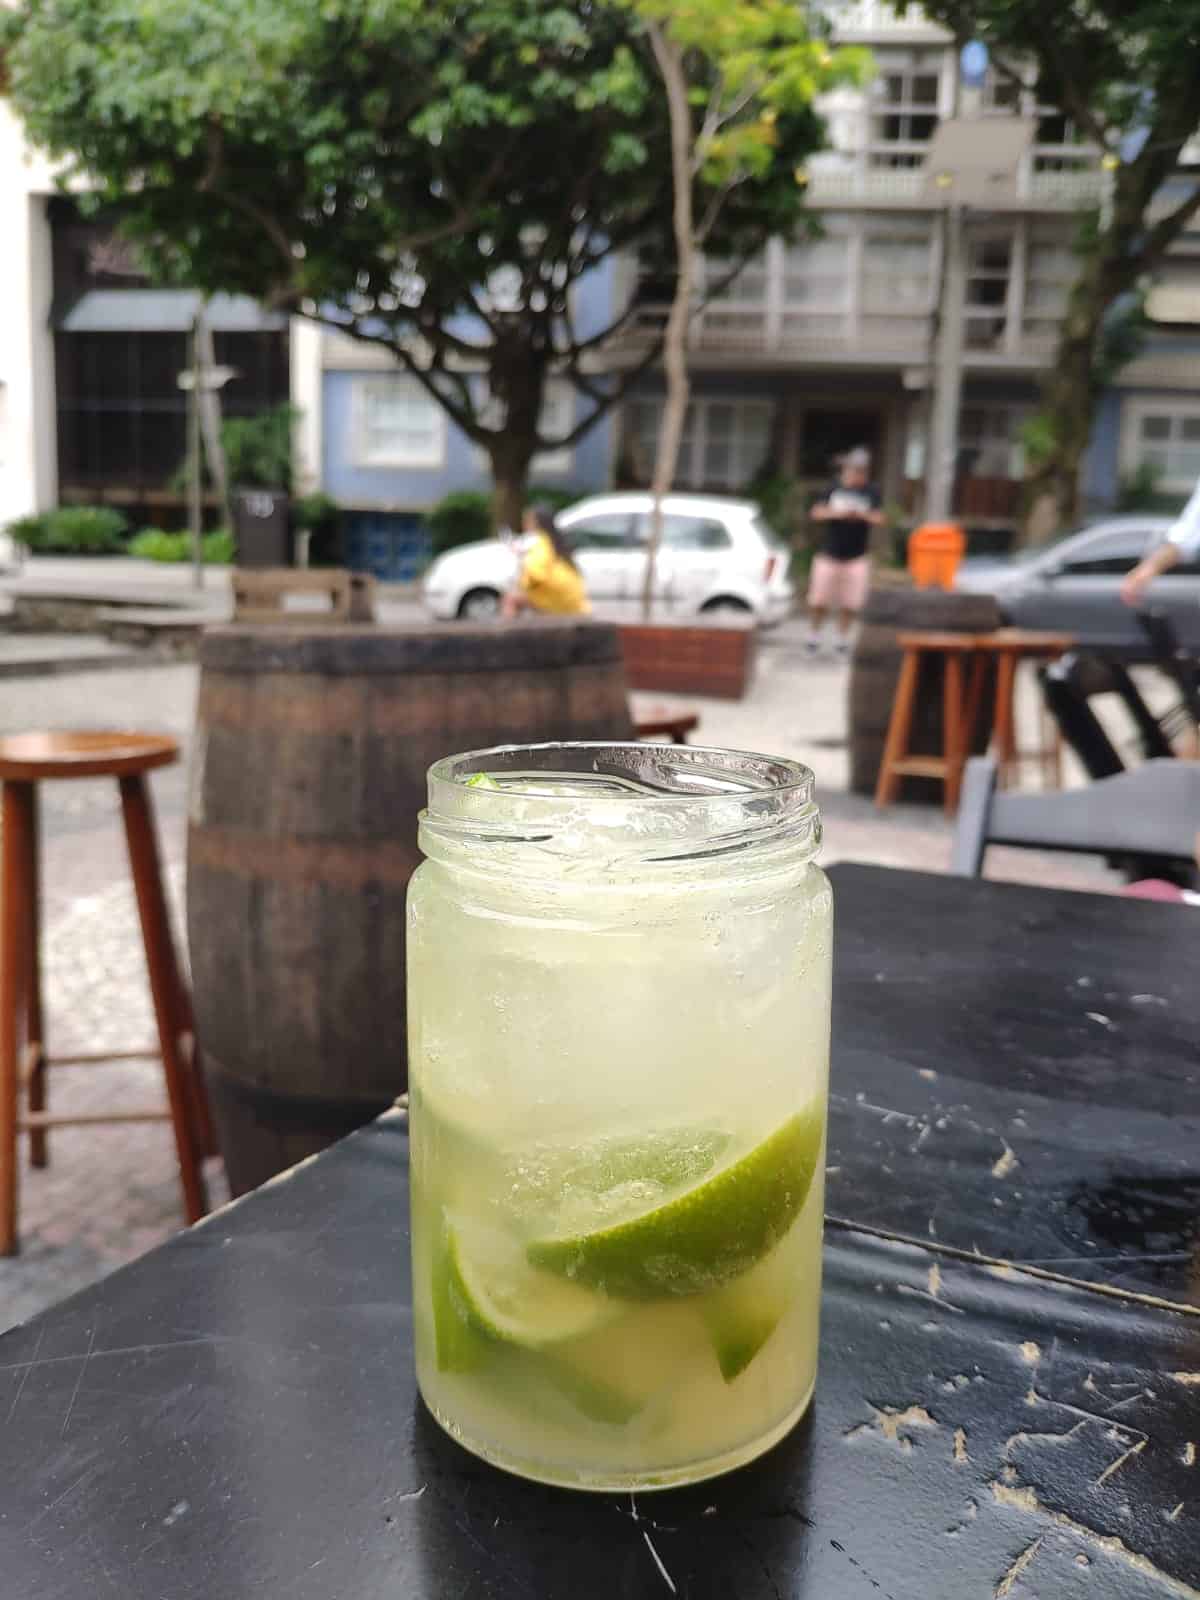 Caipirinha cocktail in Brazil, one of the most popular cocktails around the world